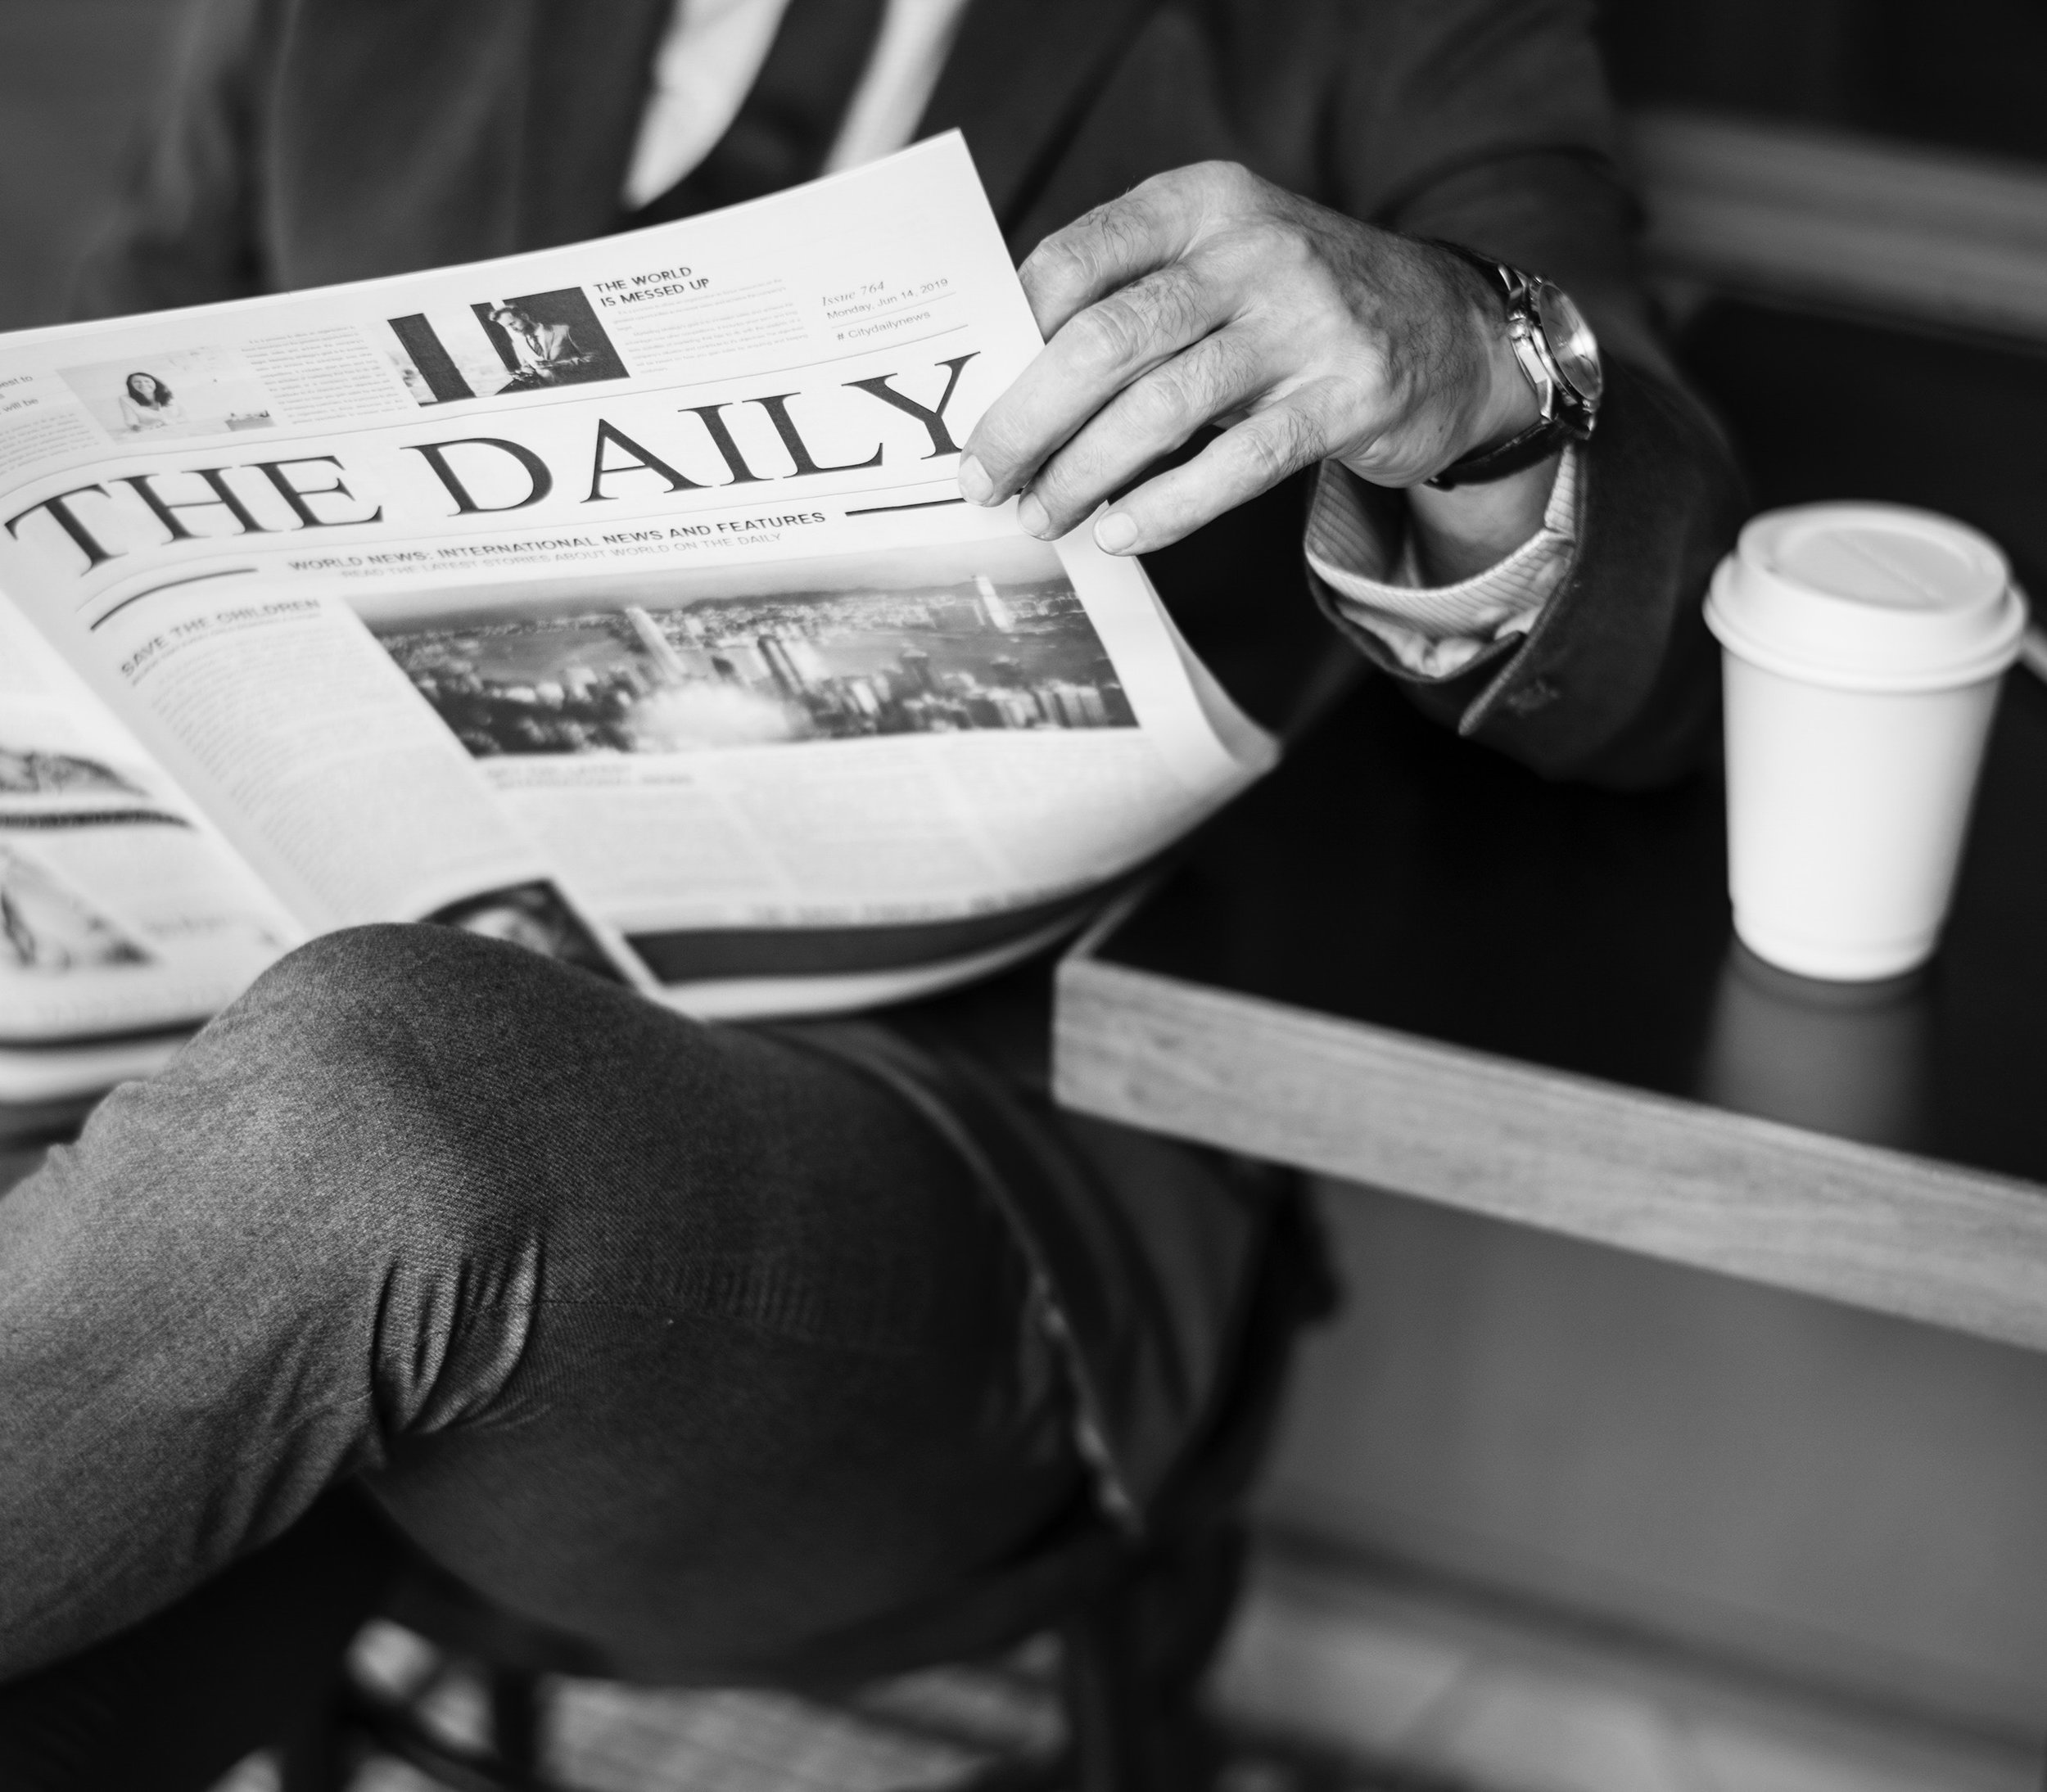 A man sits on a bench reading a newspaper, with a cup of coffee beside him